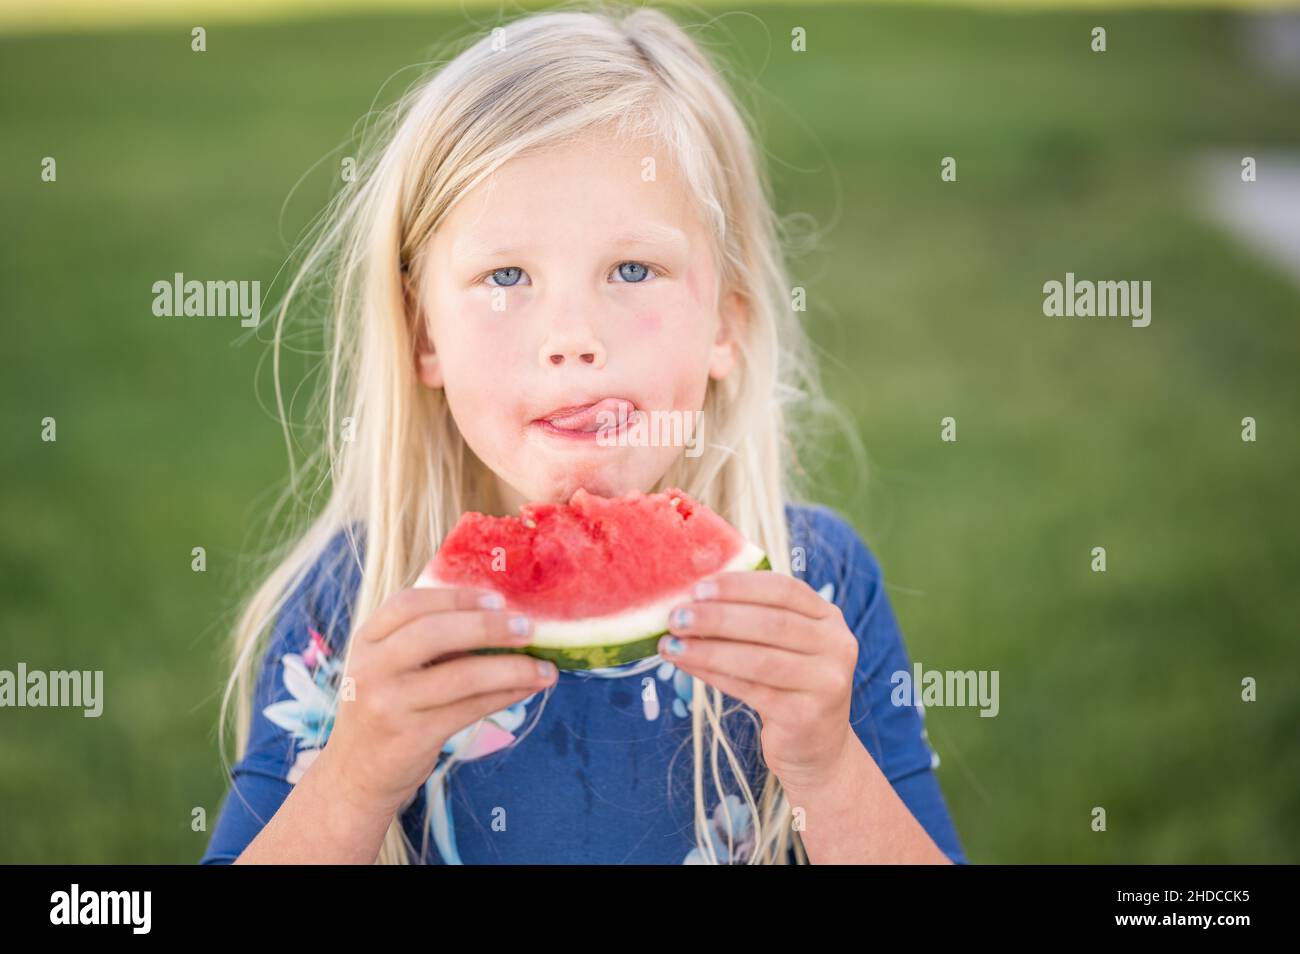 Young girl licking her lips while eating watermelon slice outside Stock Photo